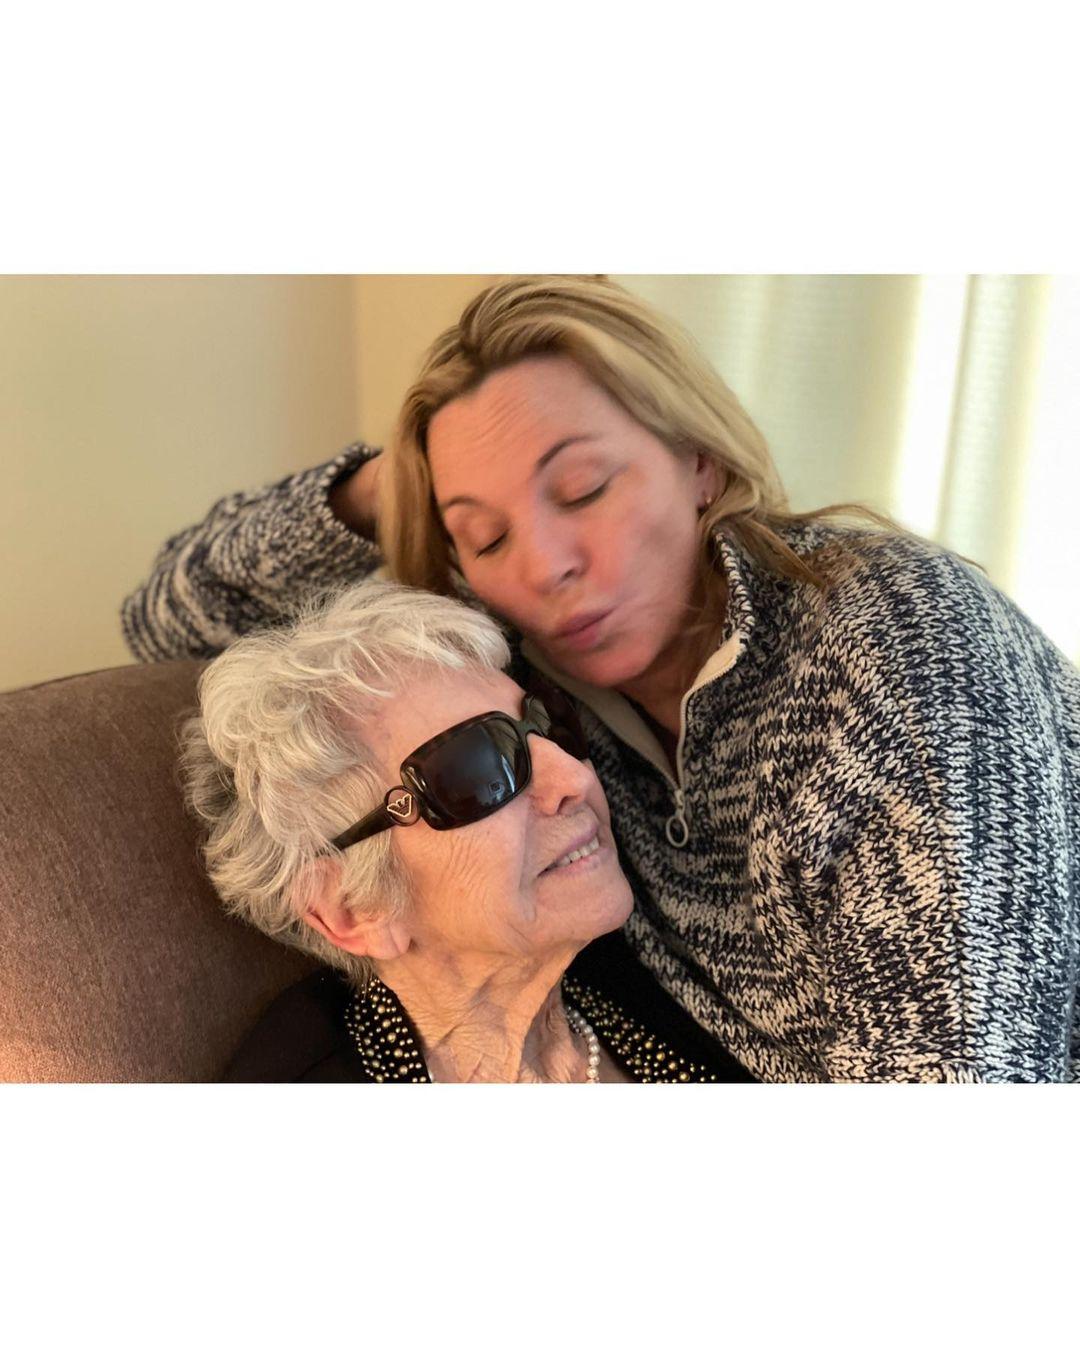 Kim Cattrall's post on her Instagram page